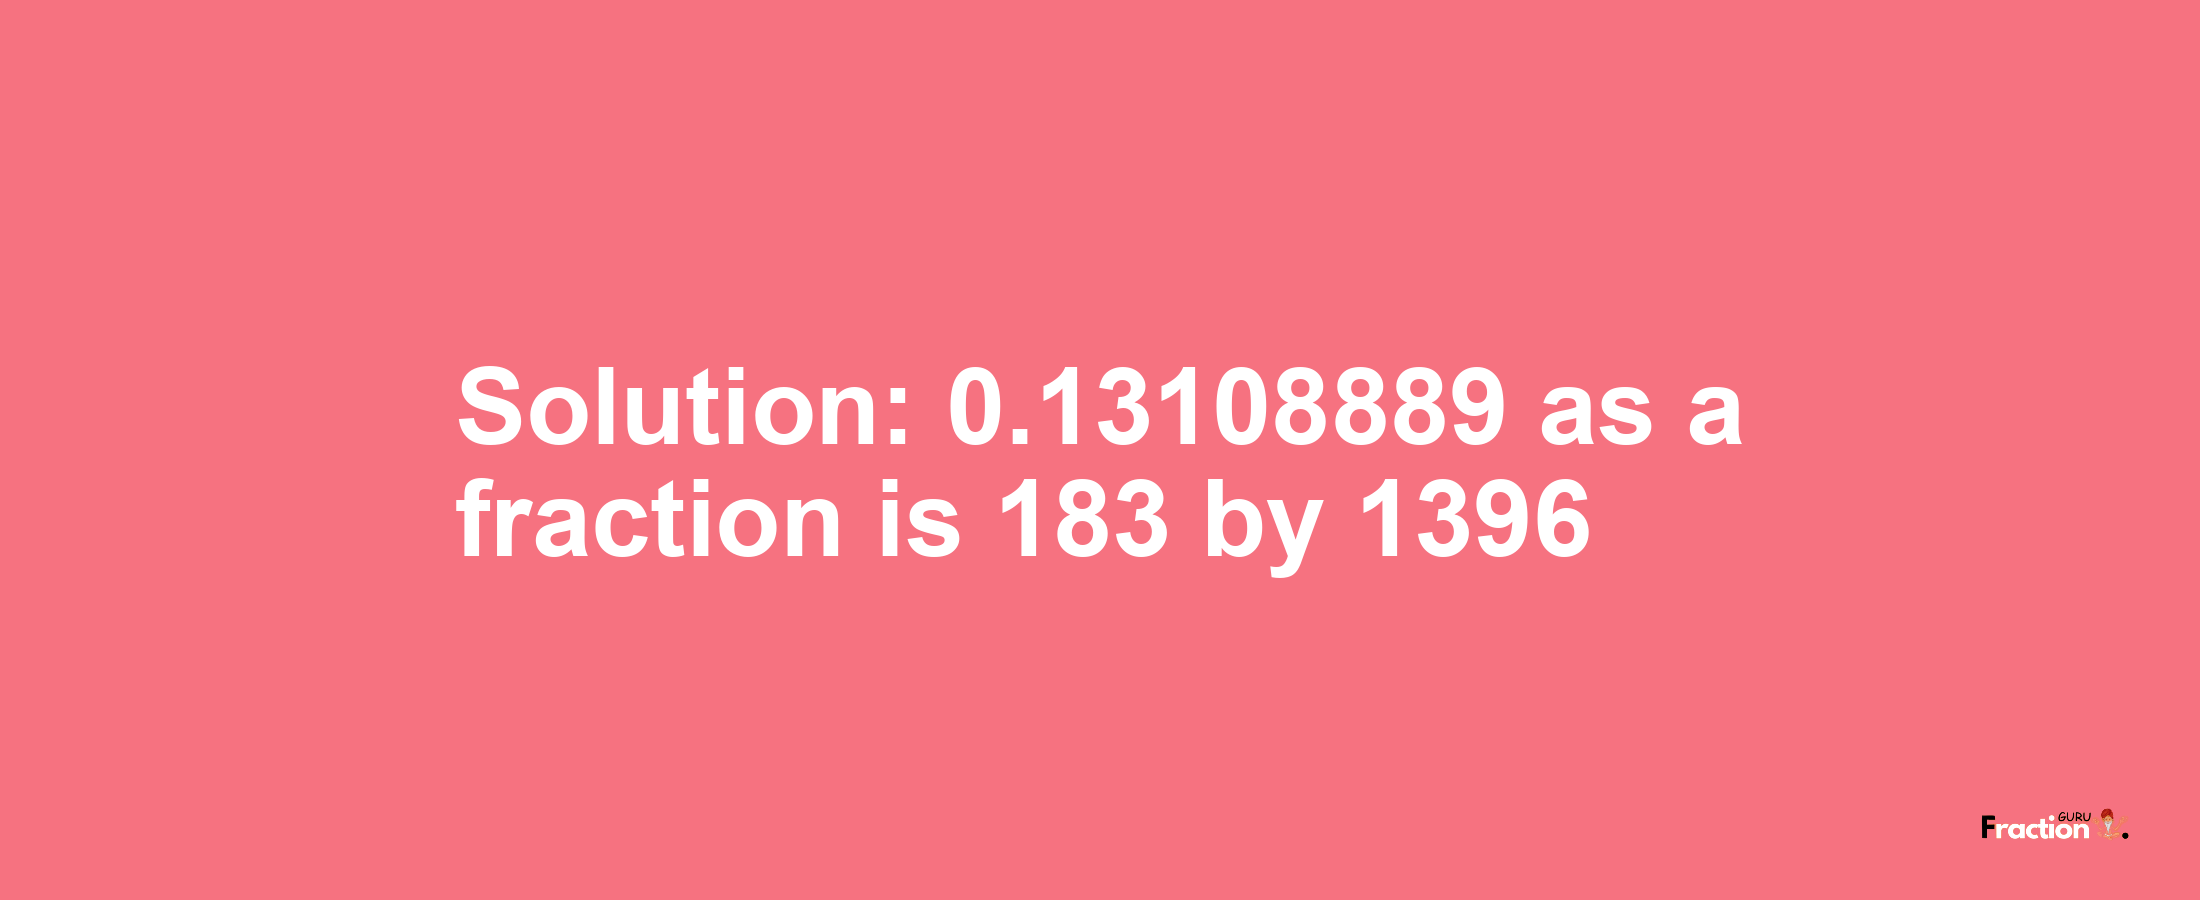 Solution:0.13108889 as a fraction is 183/1396